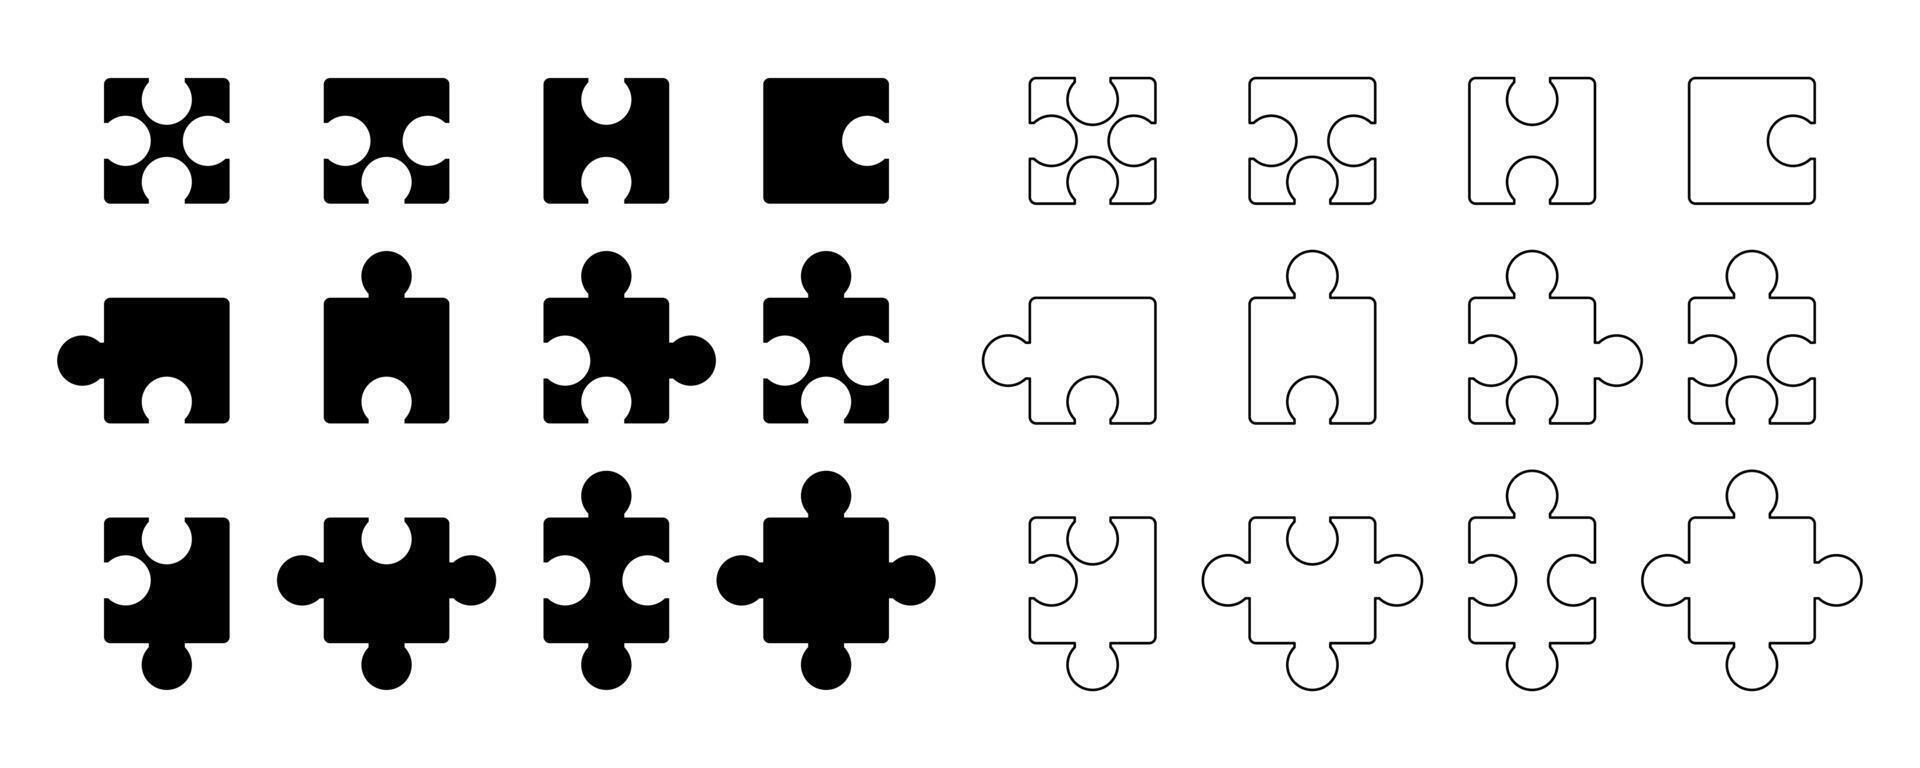 Puzzle Extension Icon Set. Design for Apps, Web, UI vector